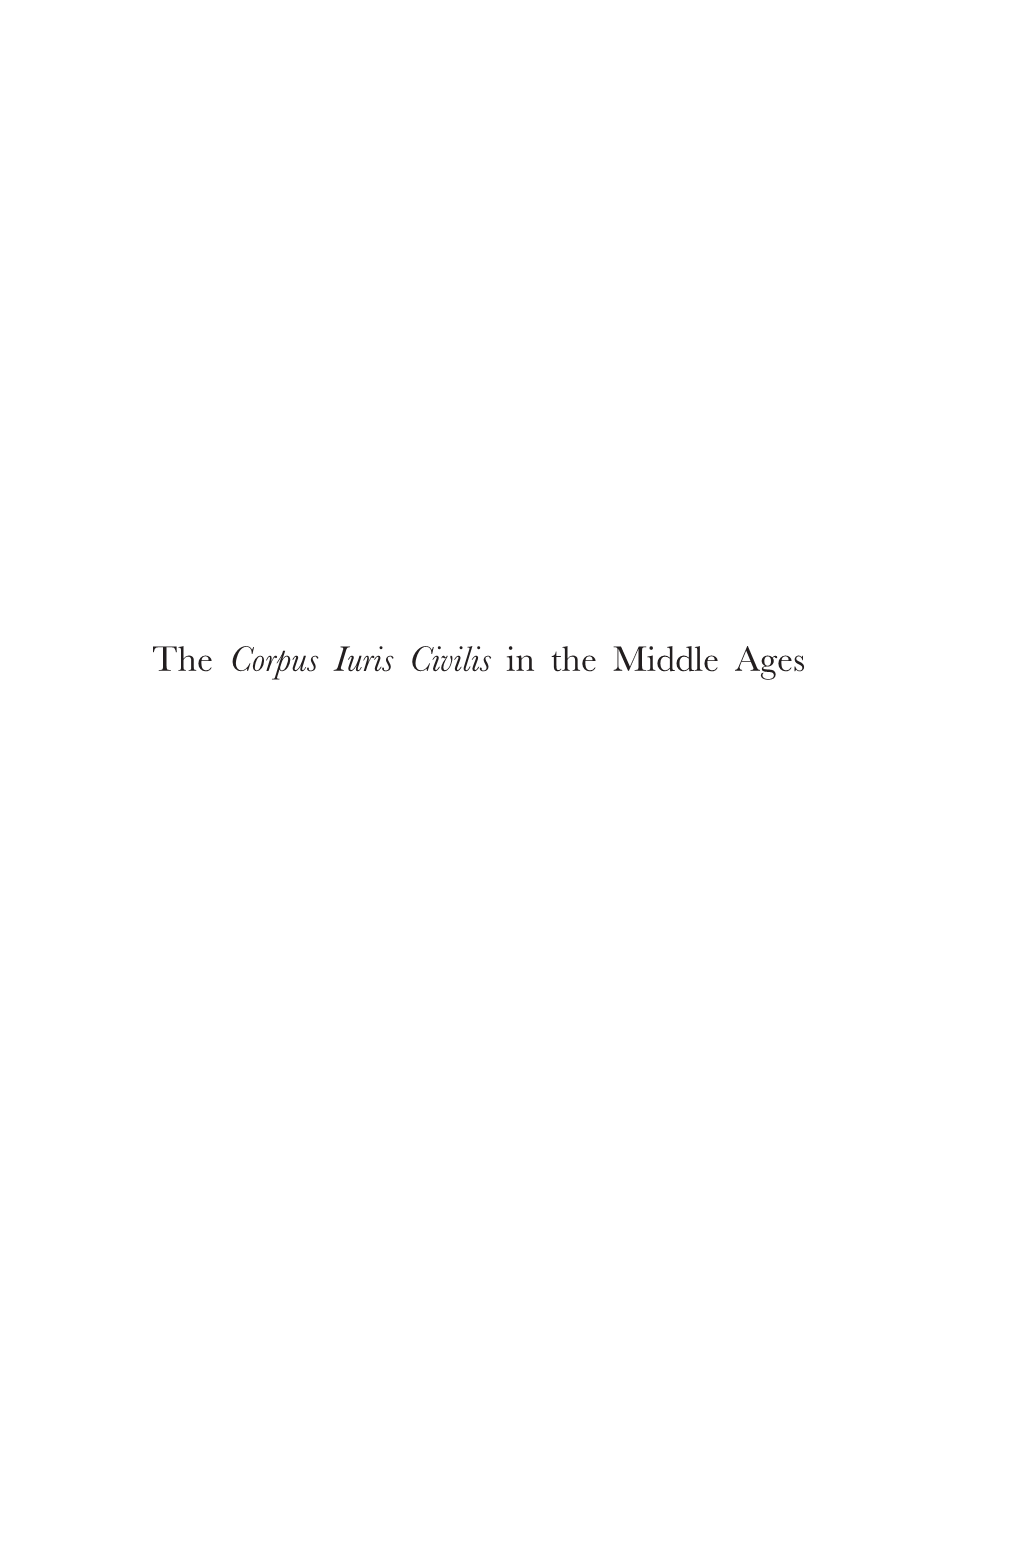 The Corpus Iuris Civilis in the Middle Ages Brill’S Studies in Intellectual History